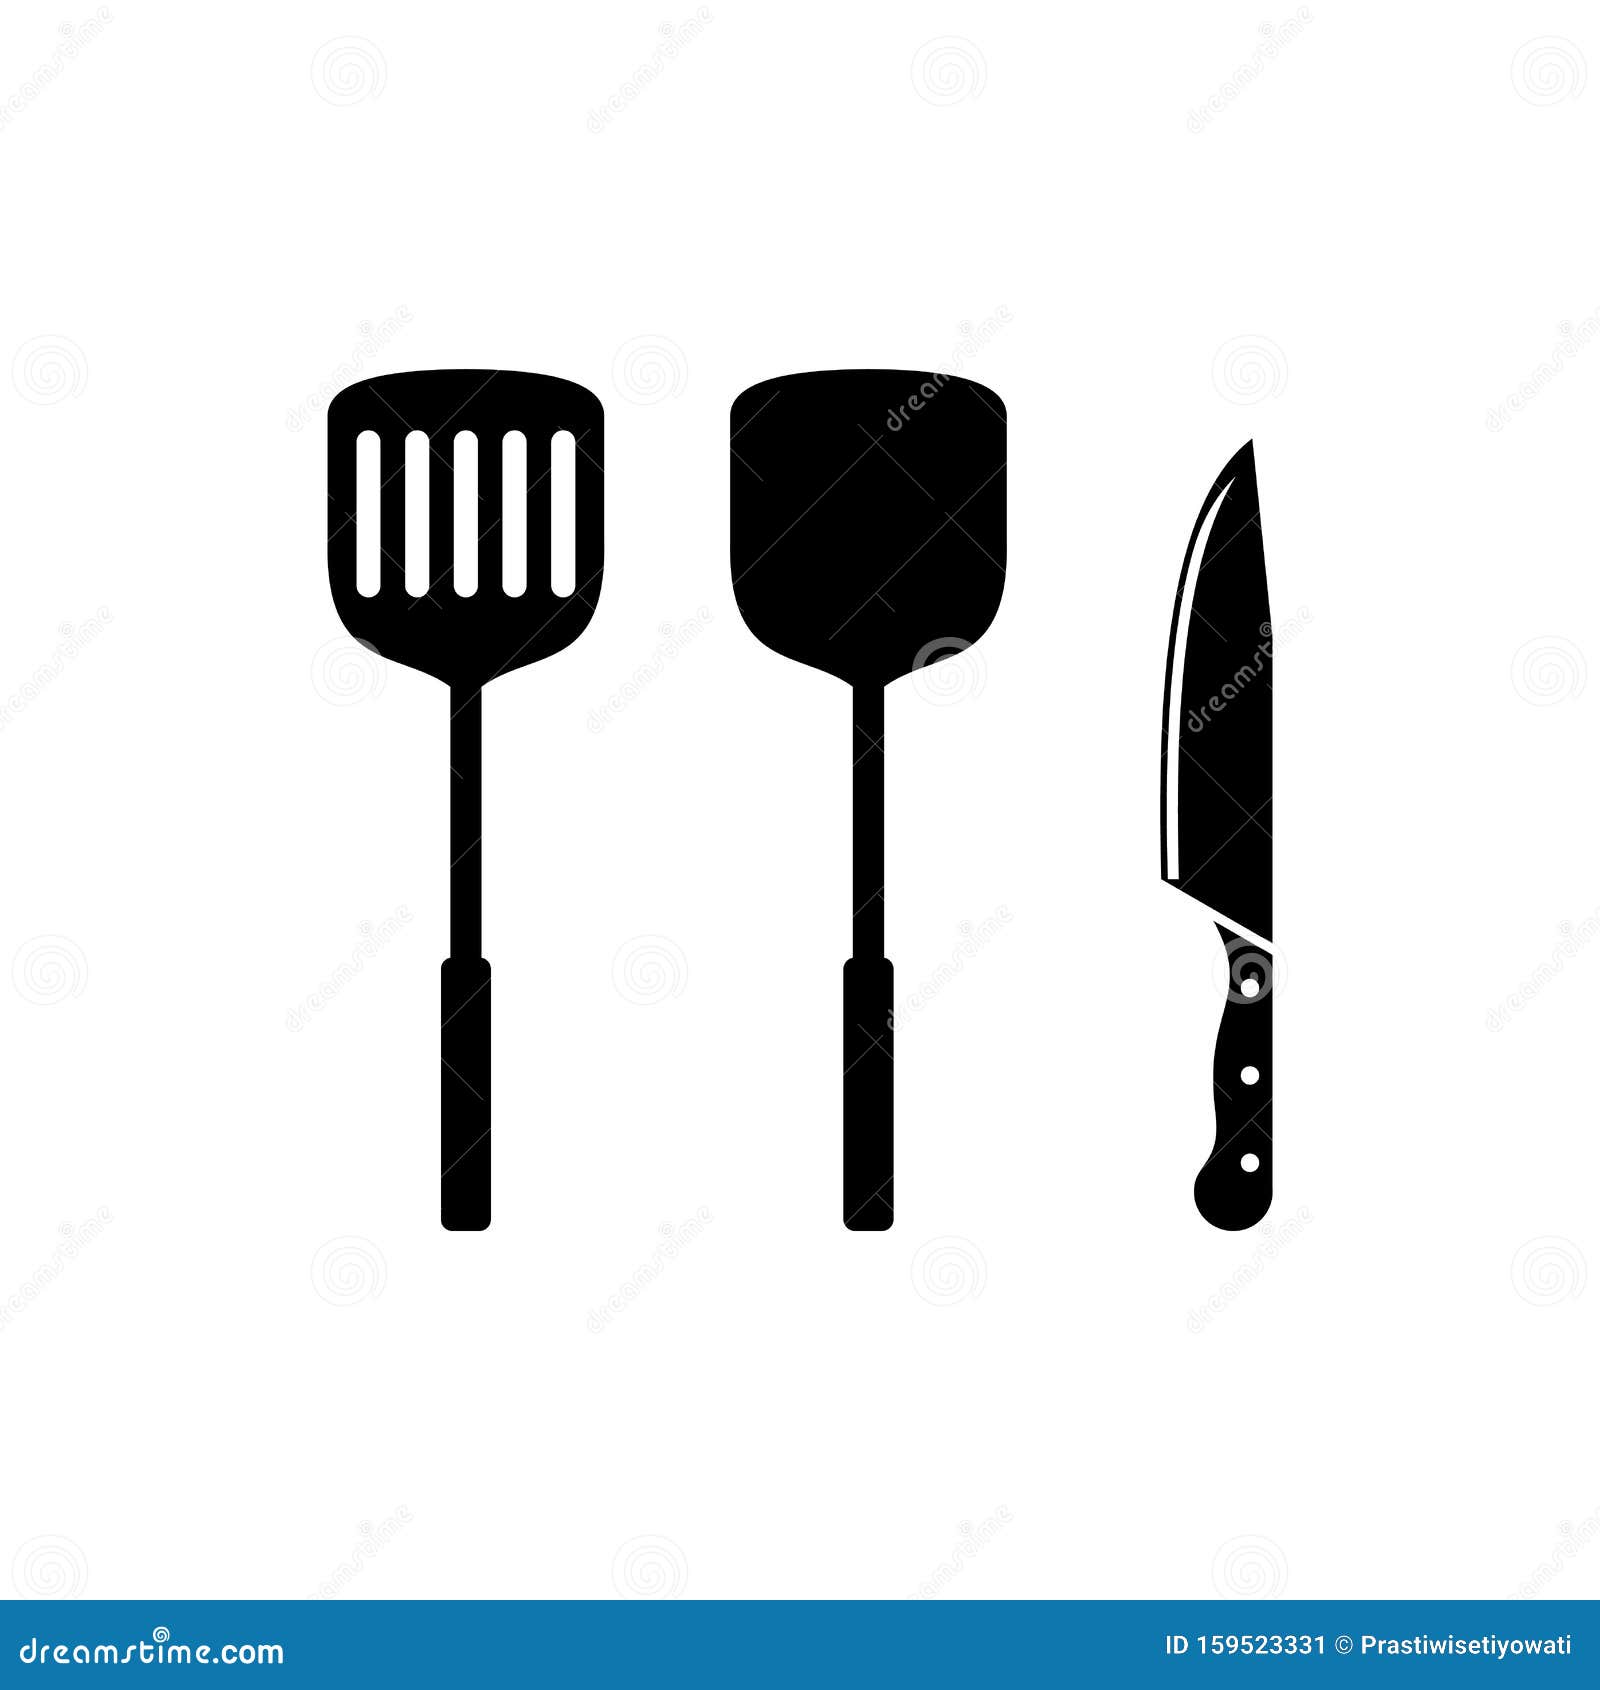 Cookware Kitchenware Icon Concept Stock Vector - Illustration of knife ...